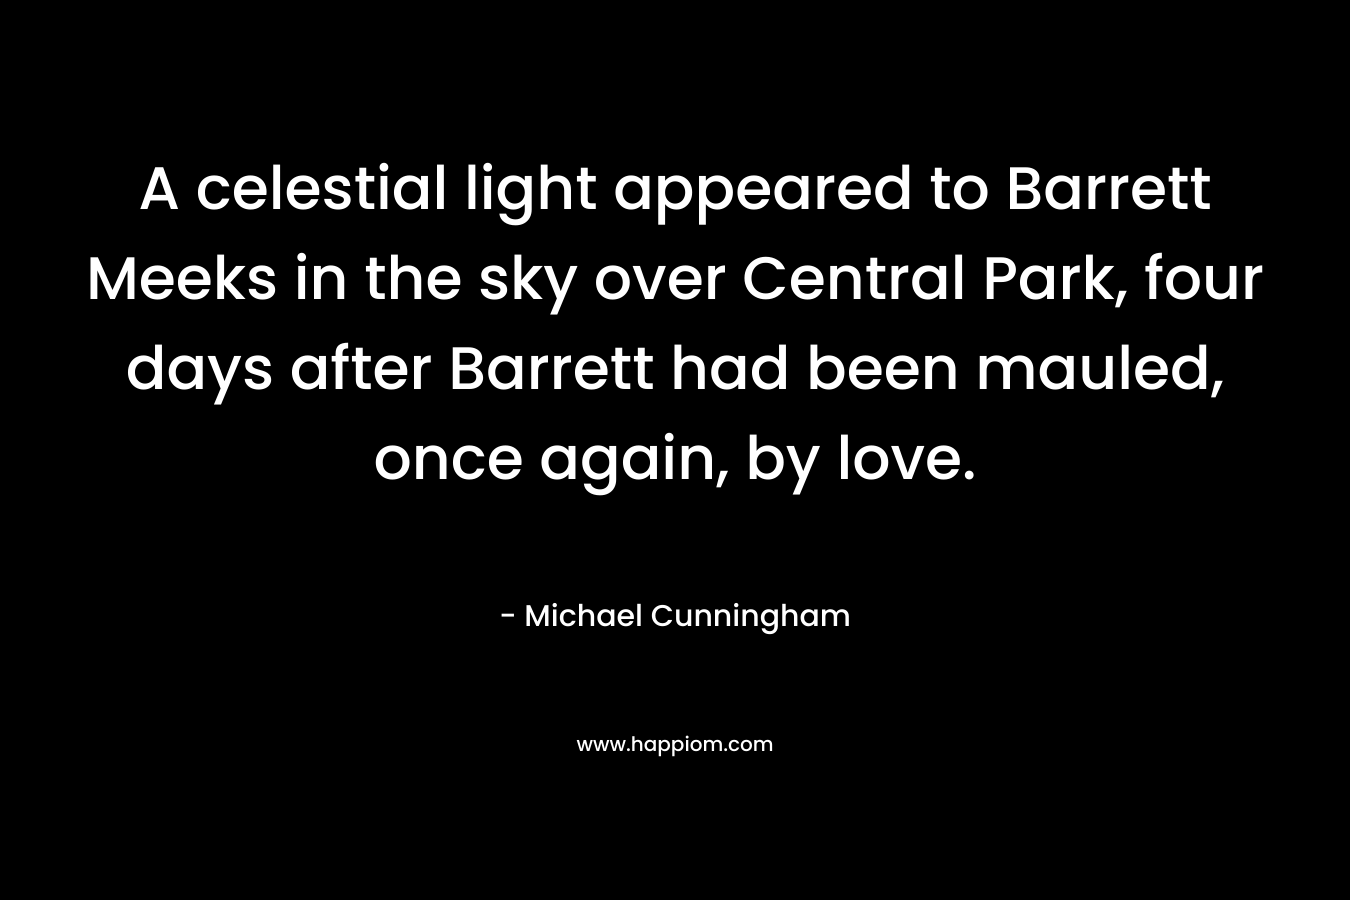 A celestial light appeared to Barrett Meeks in the sky over Central Park, four days after Barrett had been mauled, once again, by love.